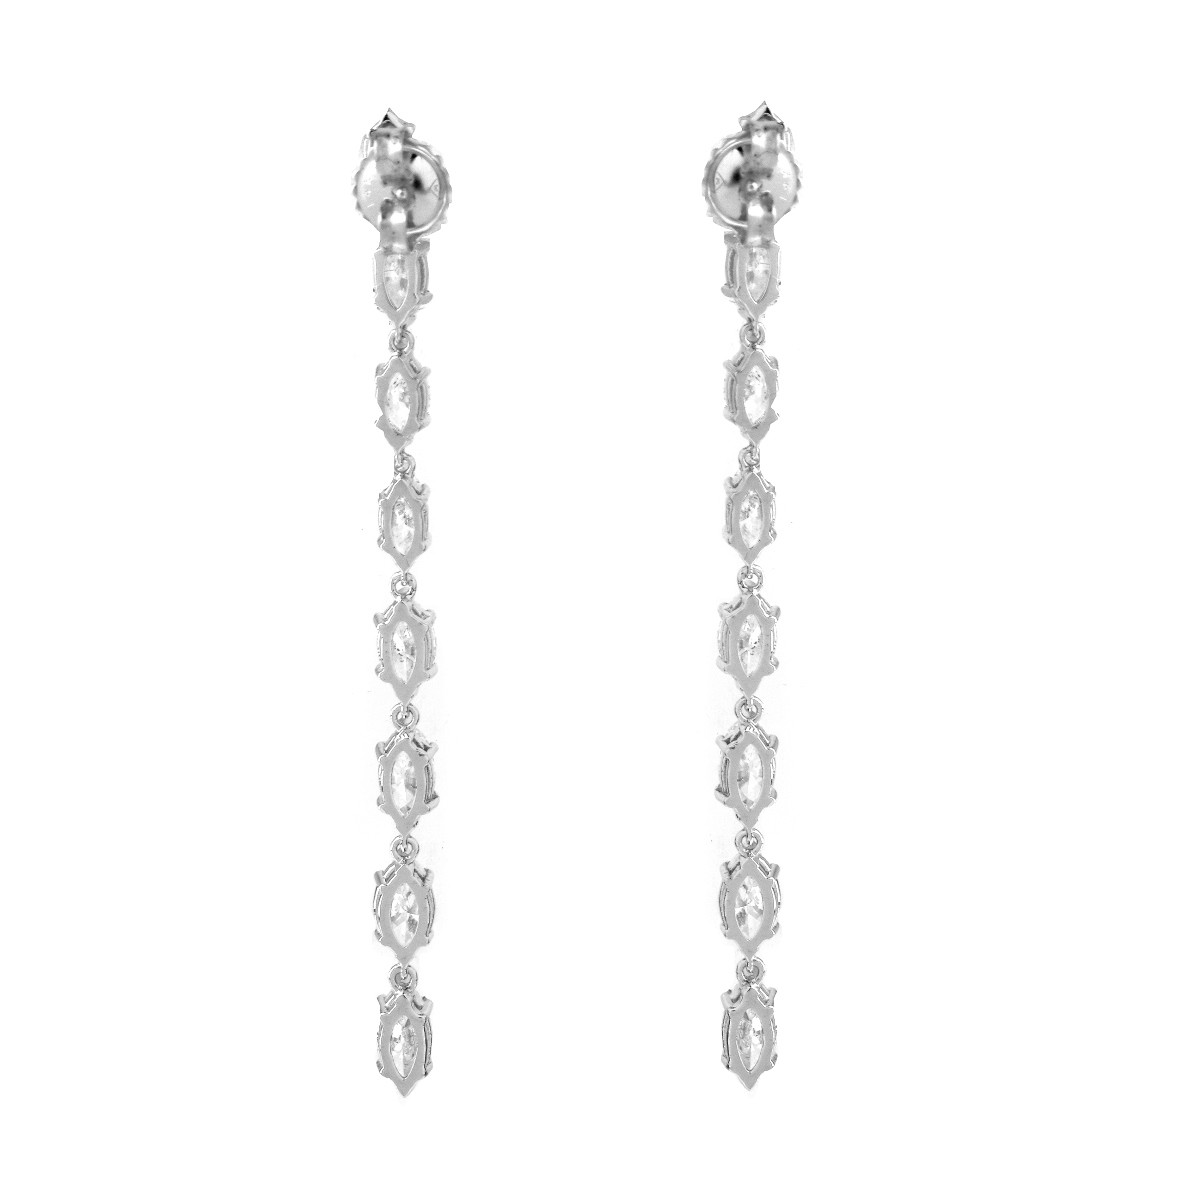 6.0ct Diamond and 14K Gold Earrings